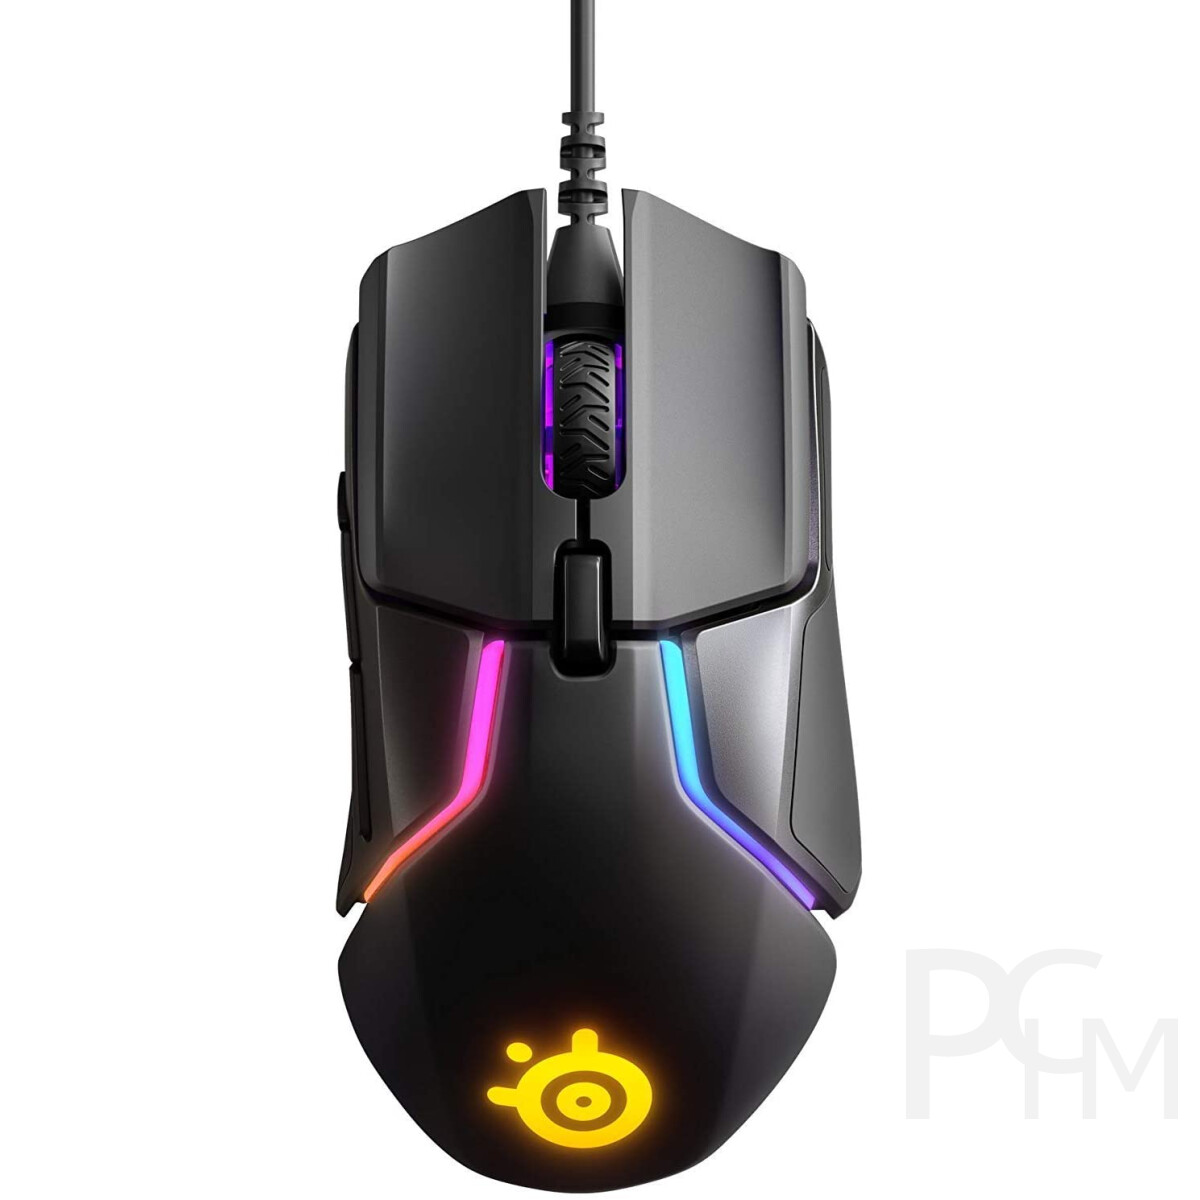 € SteelSeries 600 Gaming Rival 12.000 DPI 79,99 - Maus PCHM, -